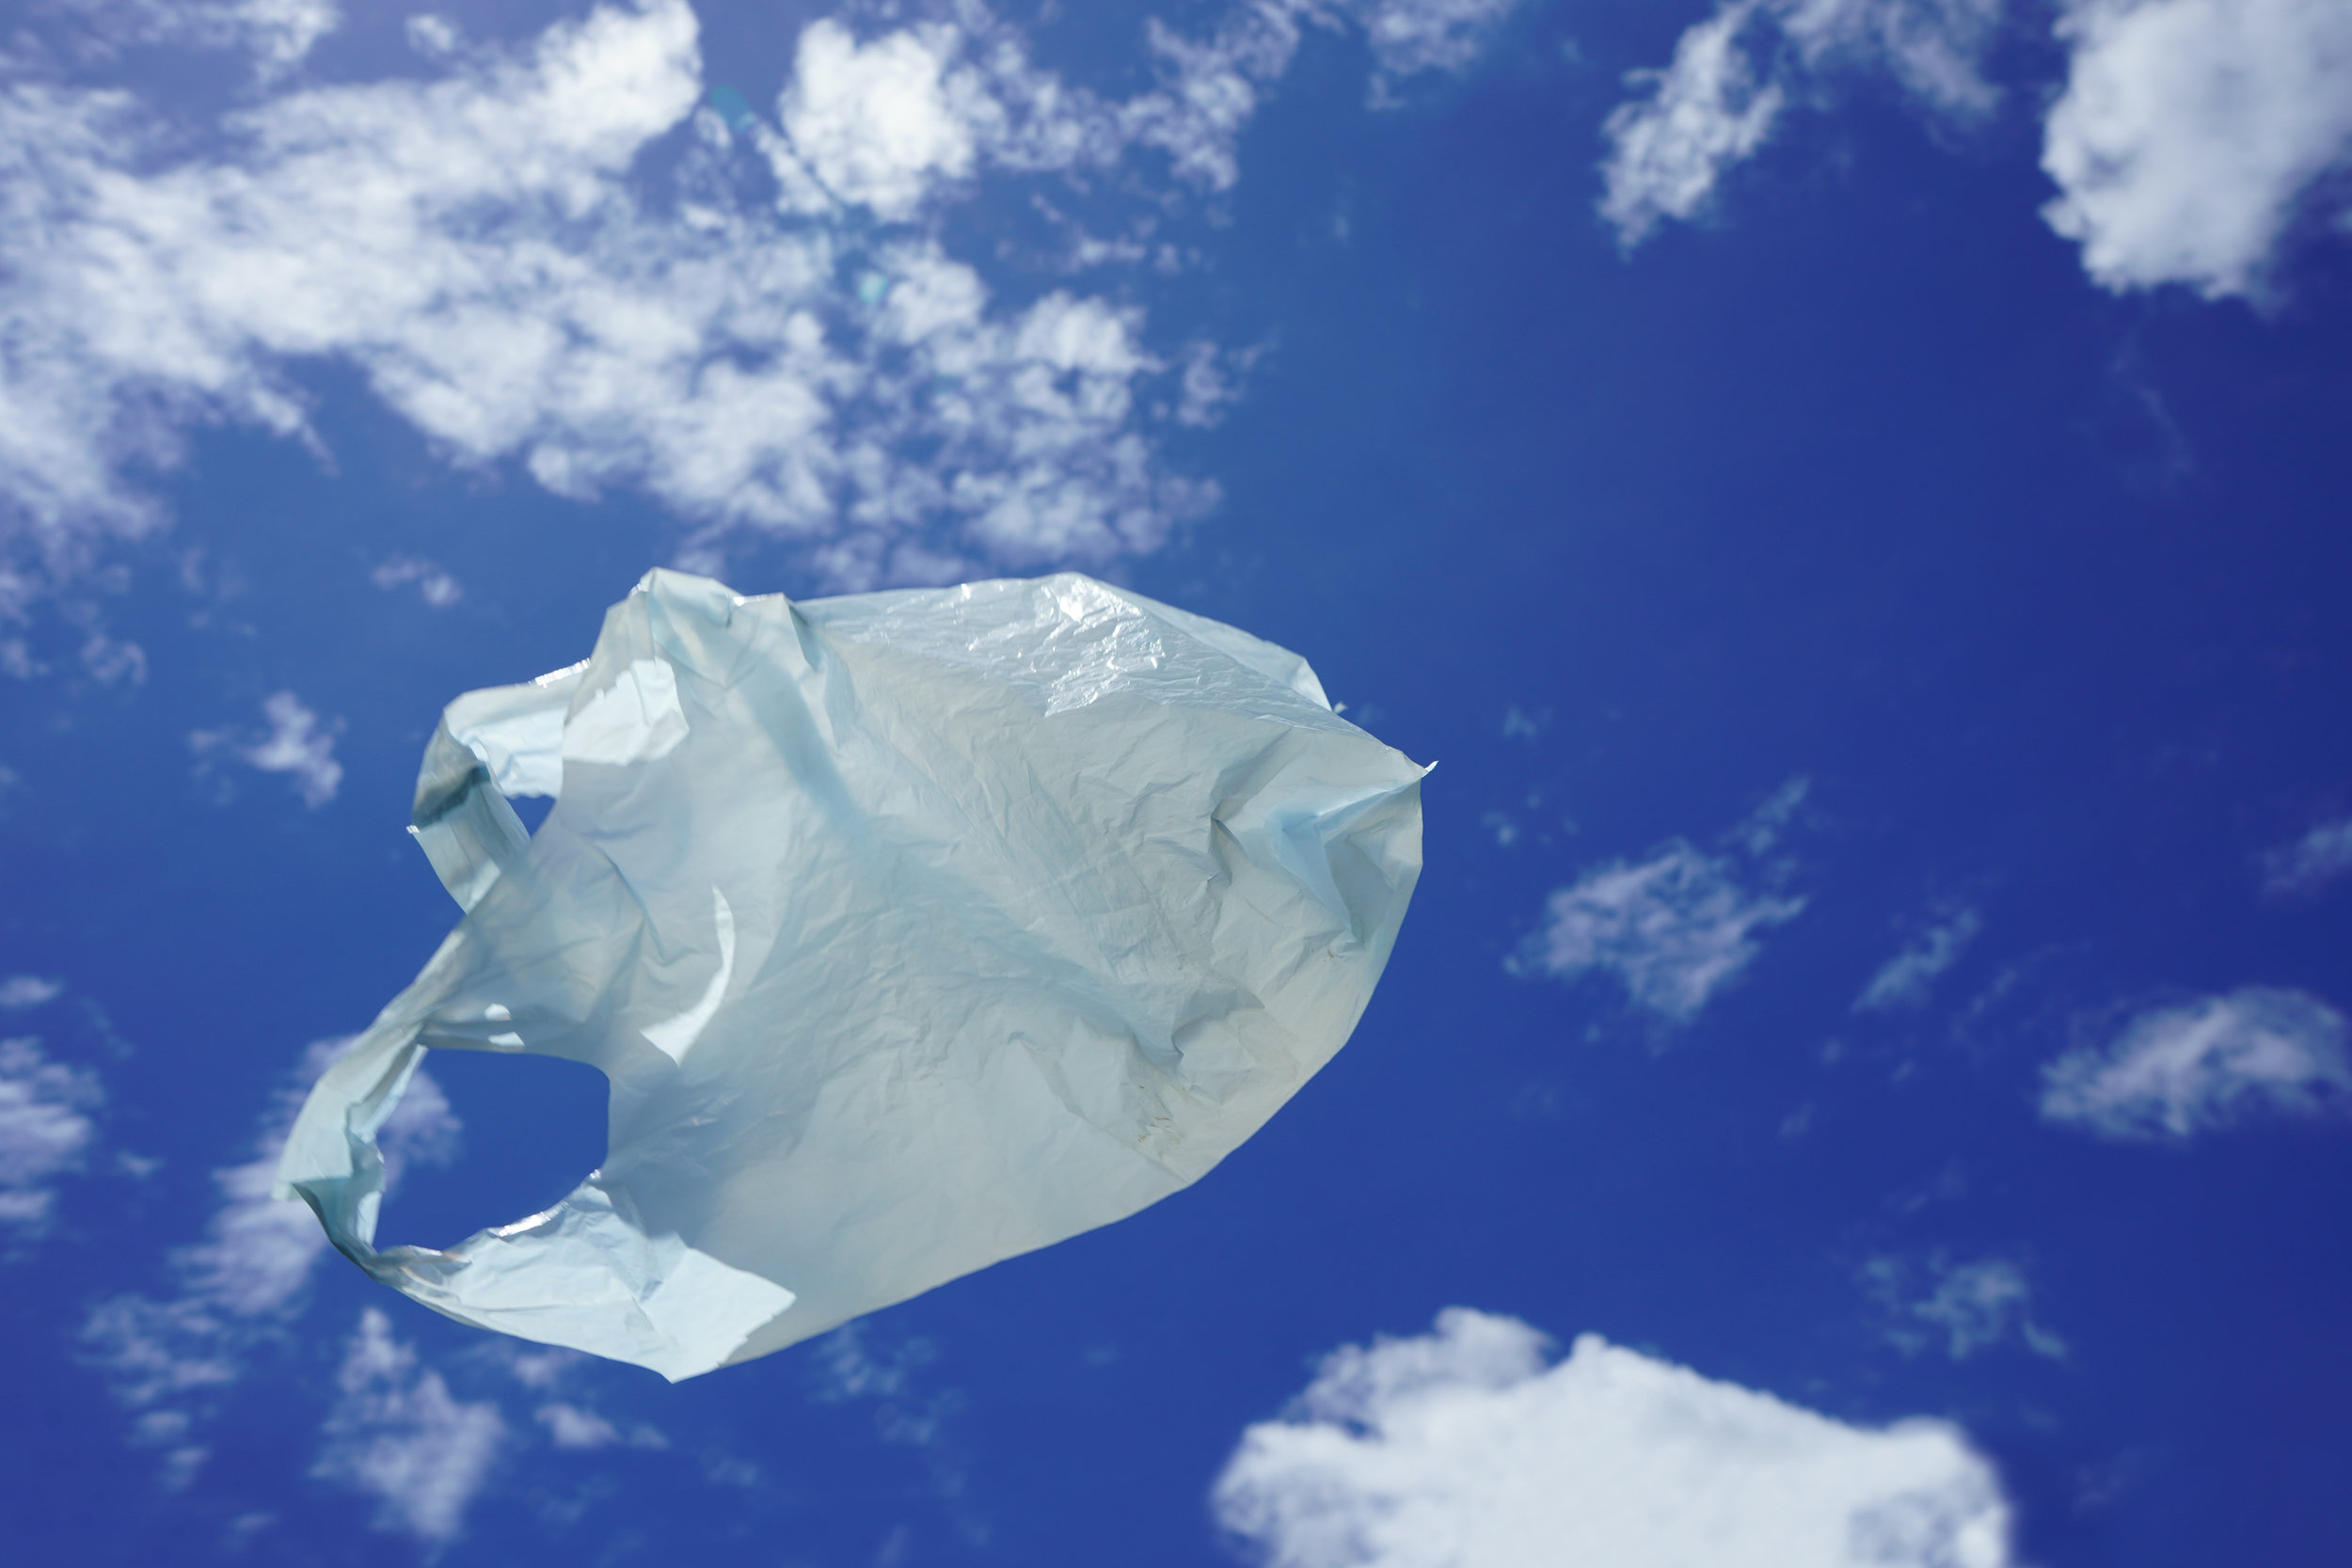 We Know Plastic Debris Litters The Oceans, What About The Skies?